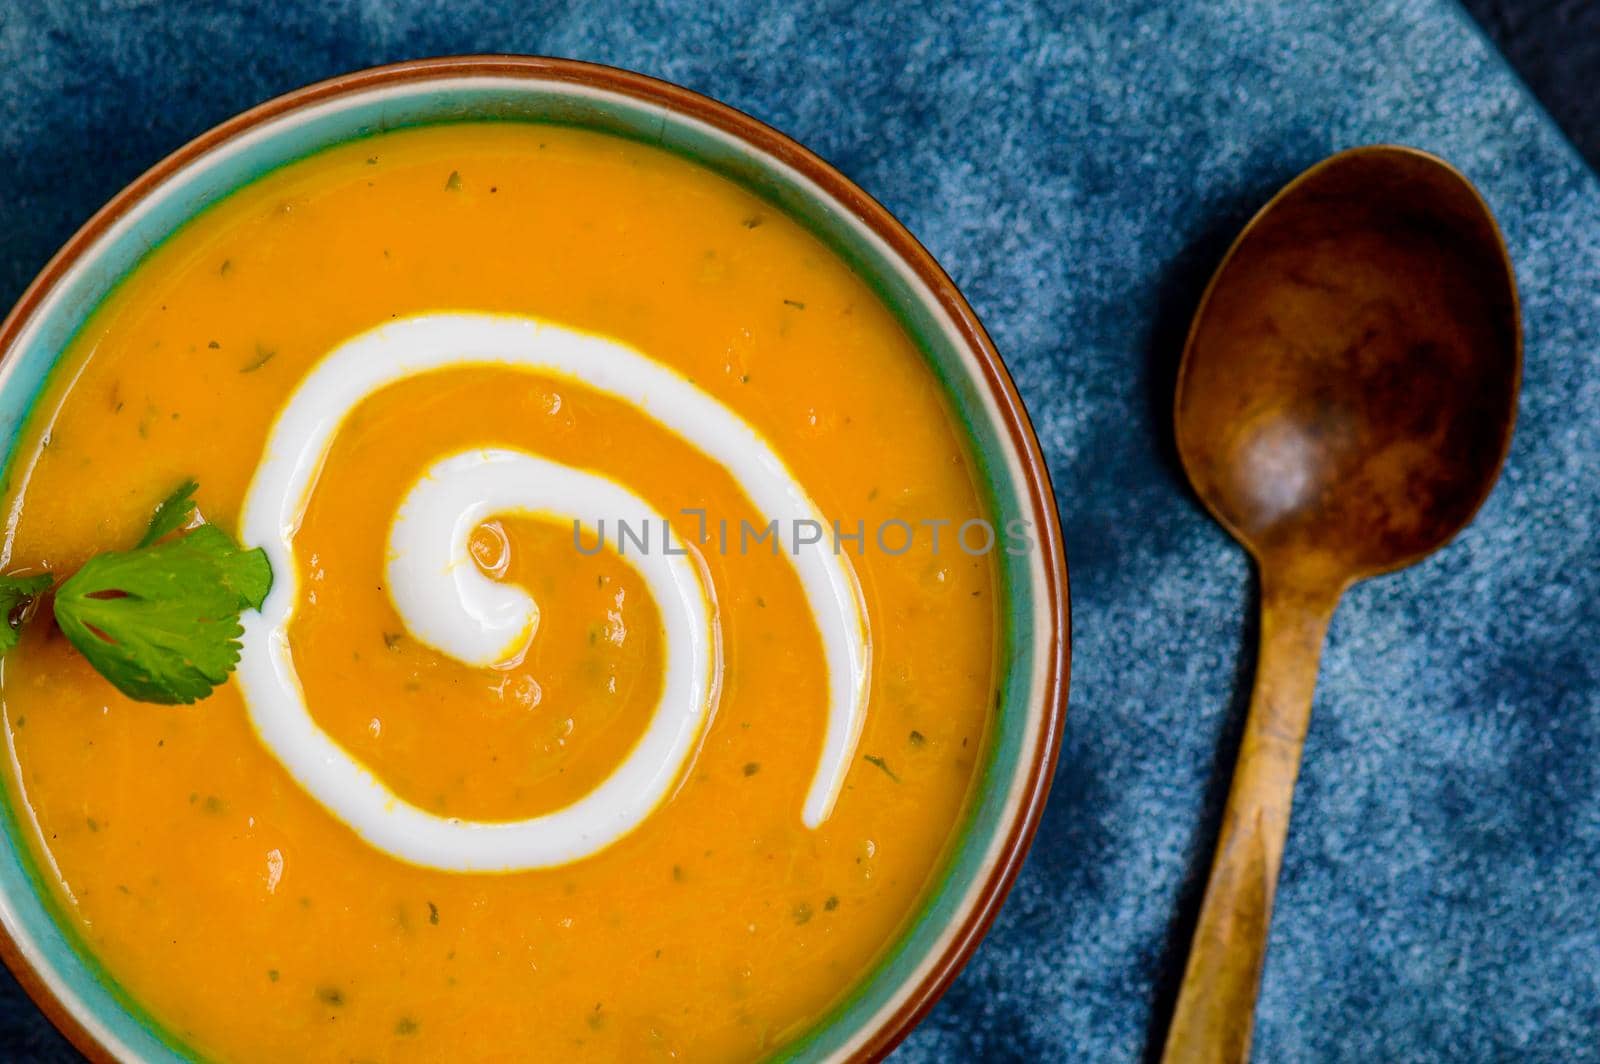 Autumnal spiced carrot and coriander soup with a swirl of cream on blue and black tabletop